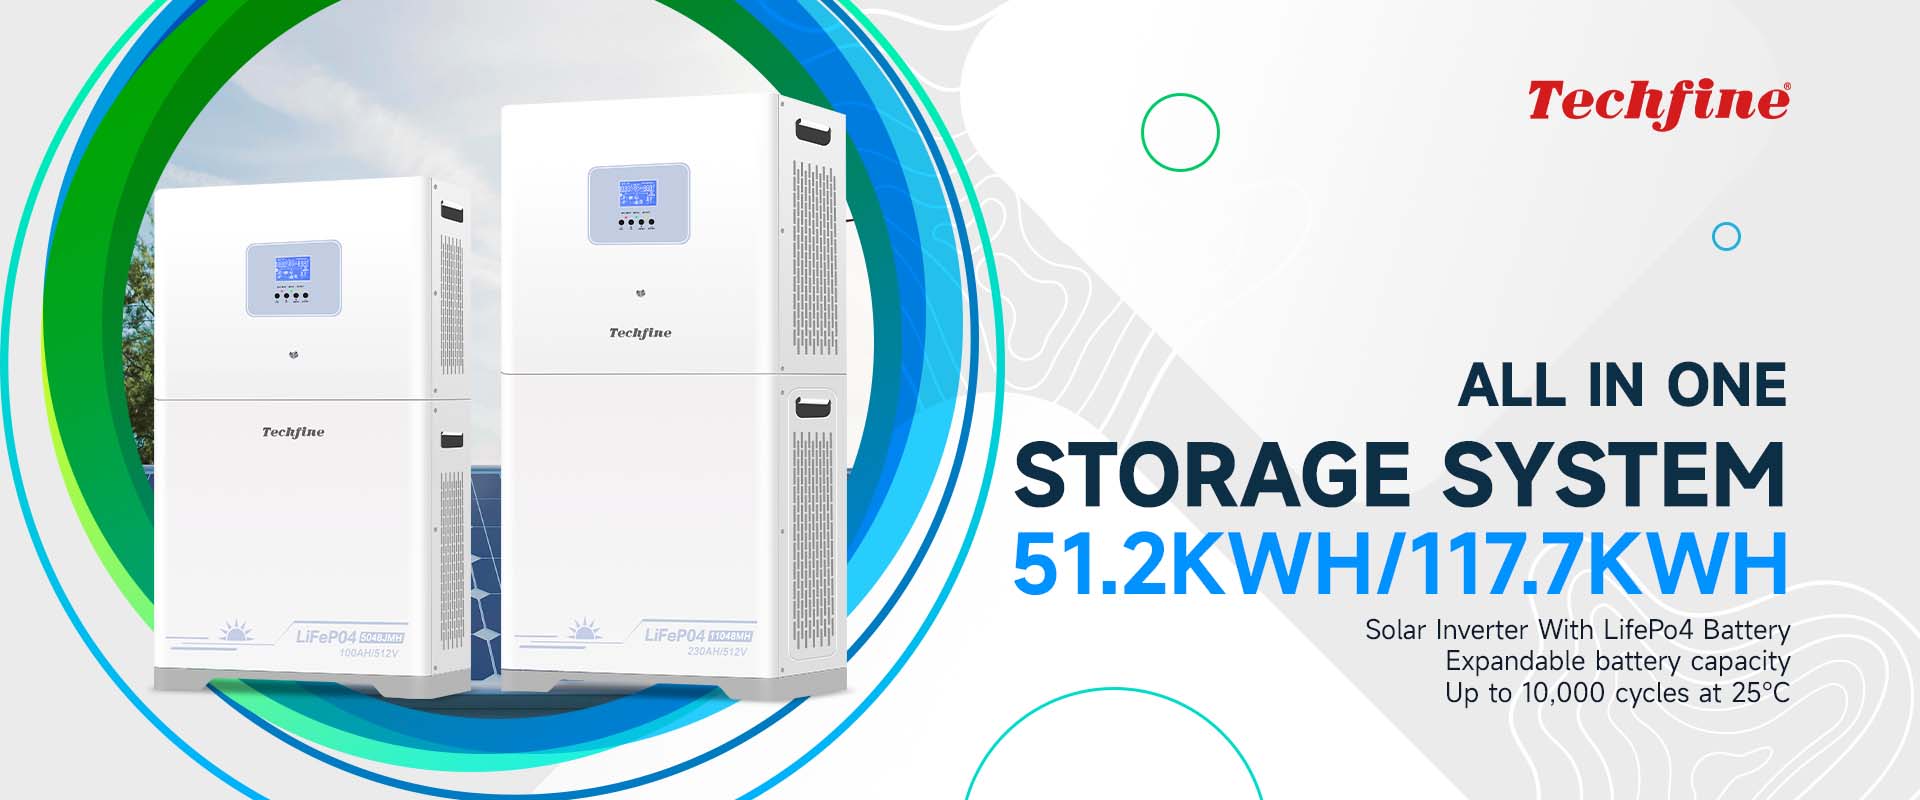 techfinesolar_All in one solar storage system 51.2kwh 117.7kwh_PC Size